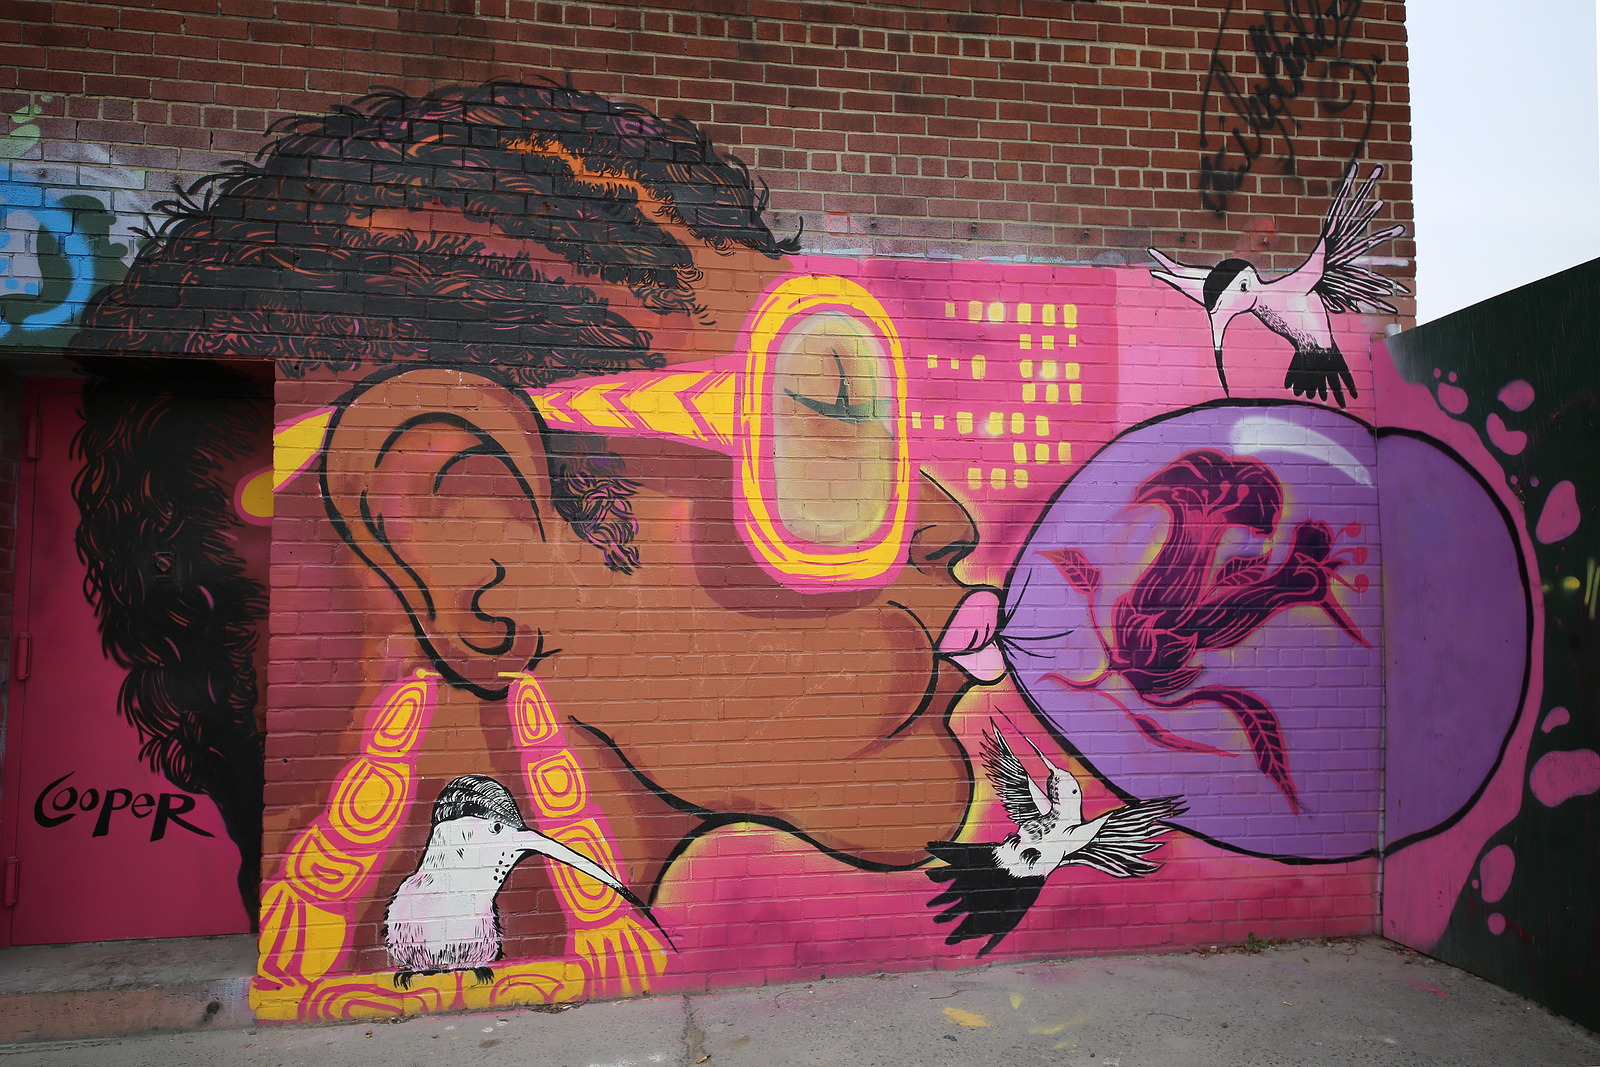 Five Places Where You Can Find Cool Graffiti Art in New York City